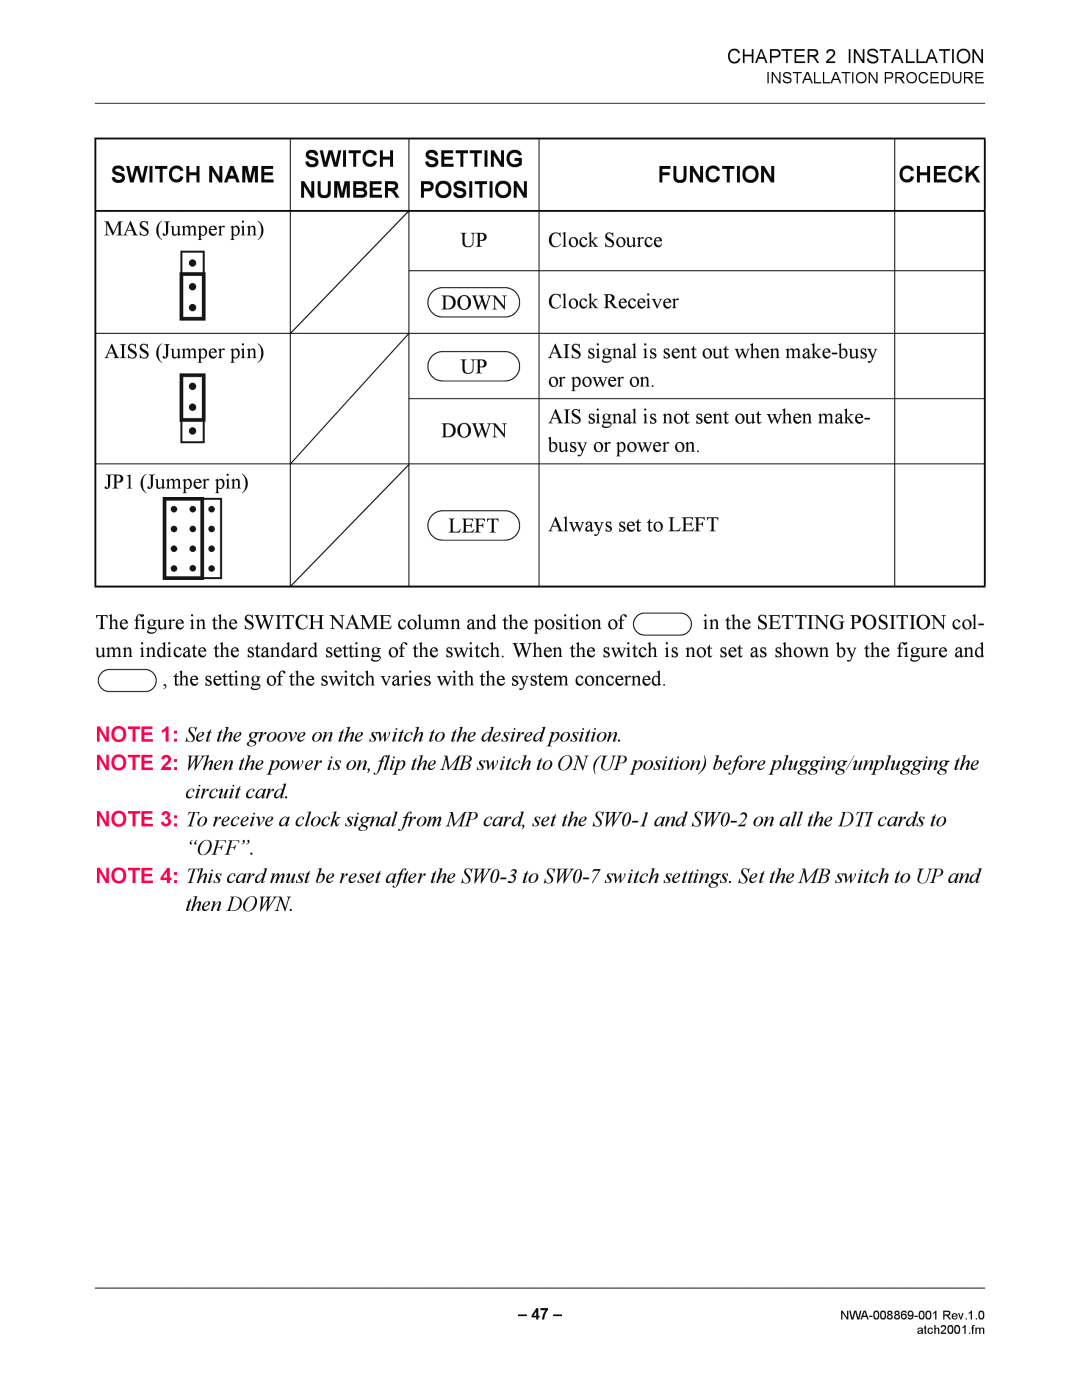 NEC NWA-008869-001 manual Switch Name, Setting, Function, Check, Number, Position 